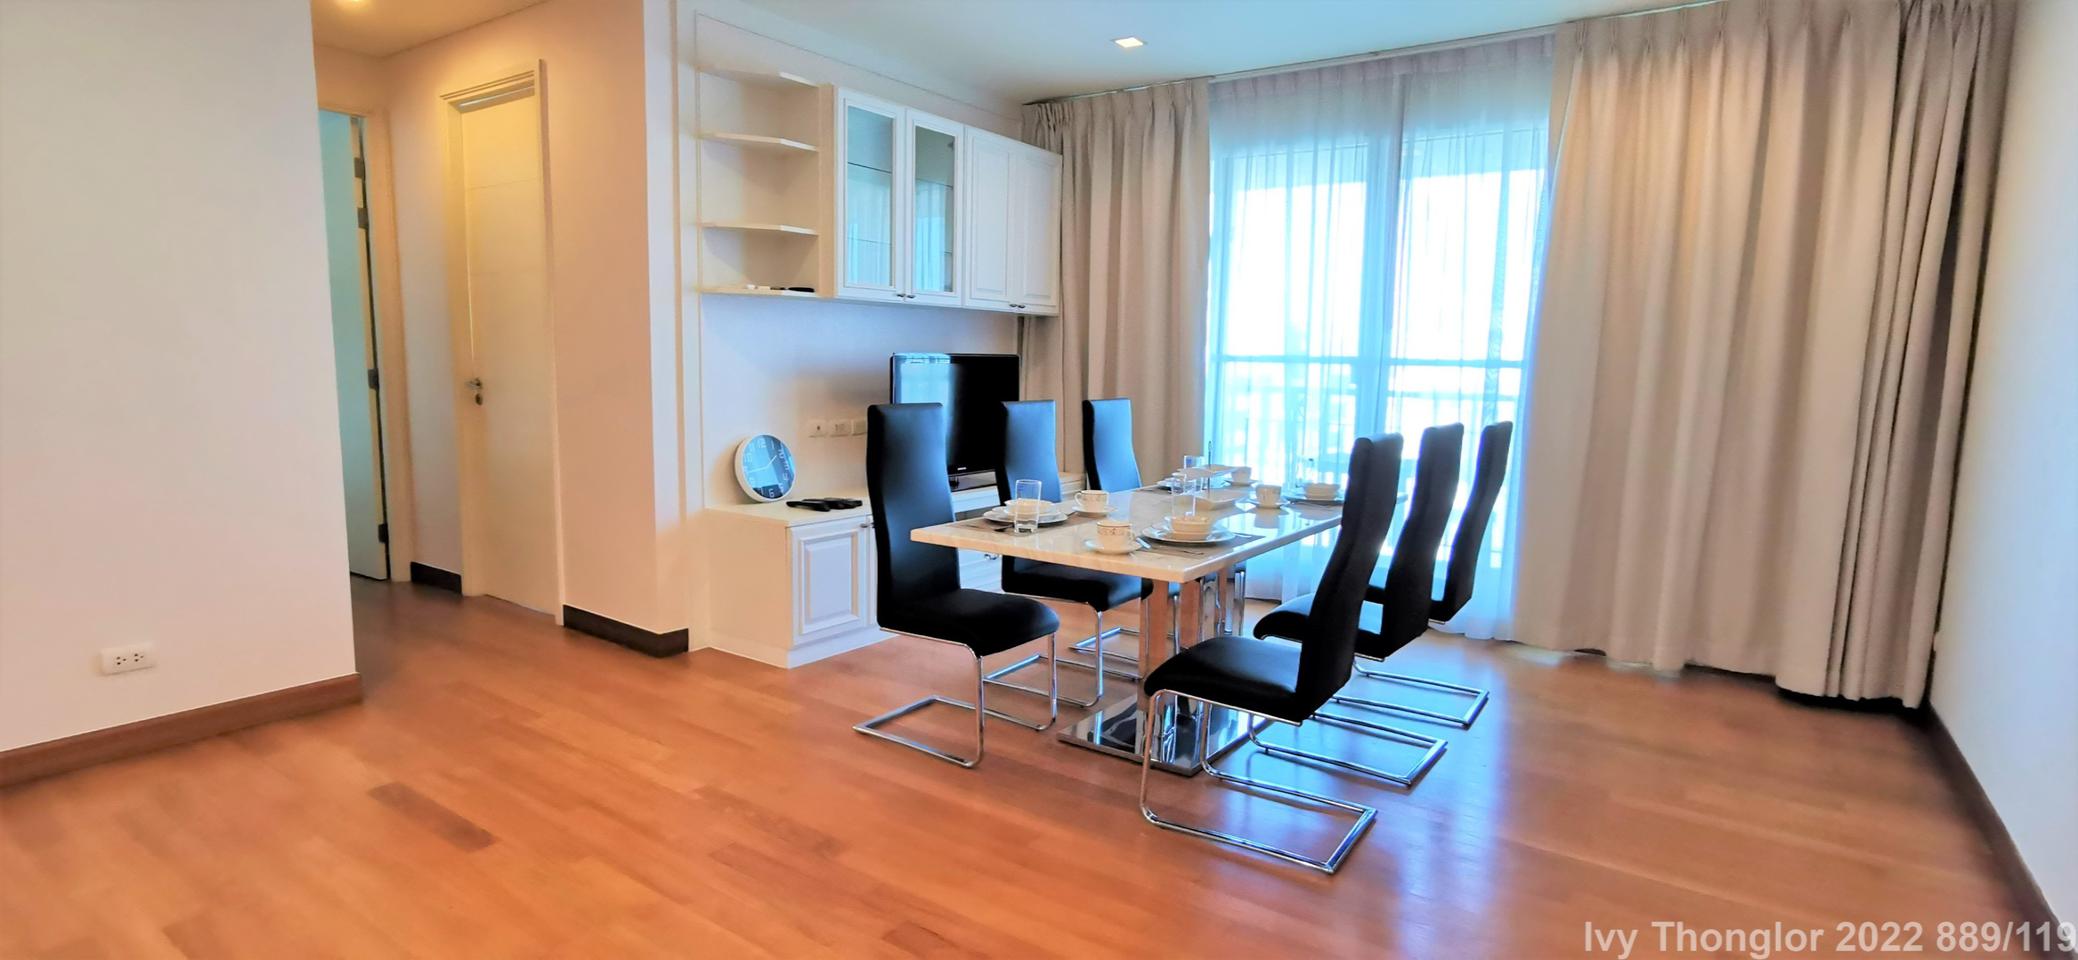  Rent Nice Condo 4 Beds the whole floor 10th at Thong lor suitable for family very nice location BTS Thong lor 